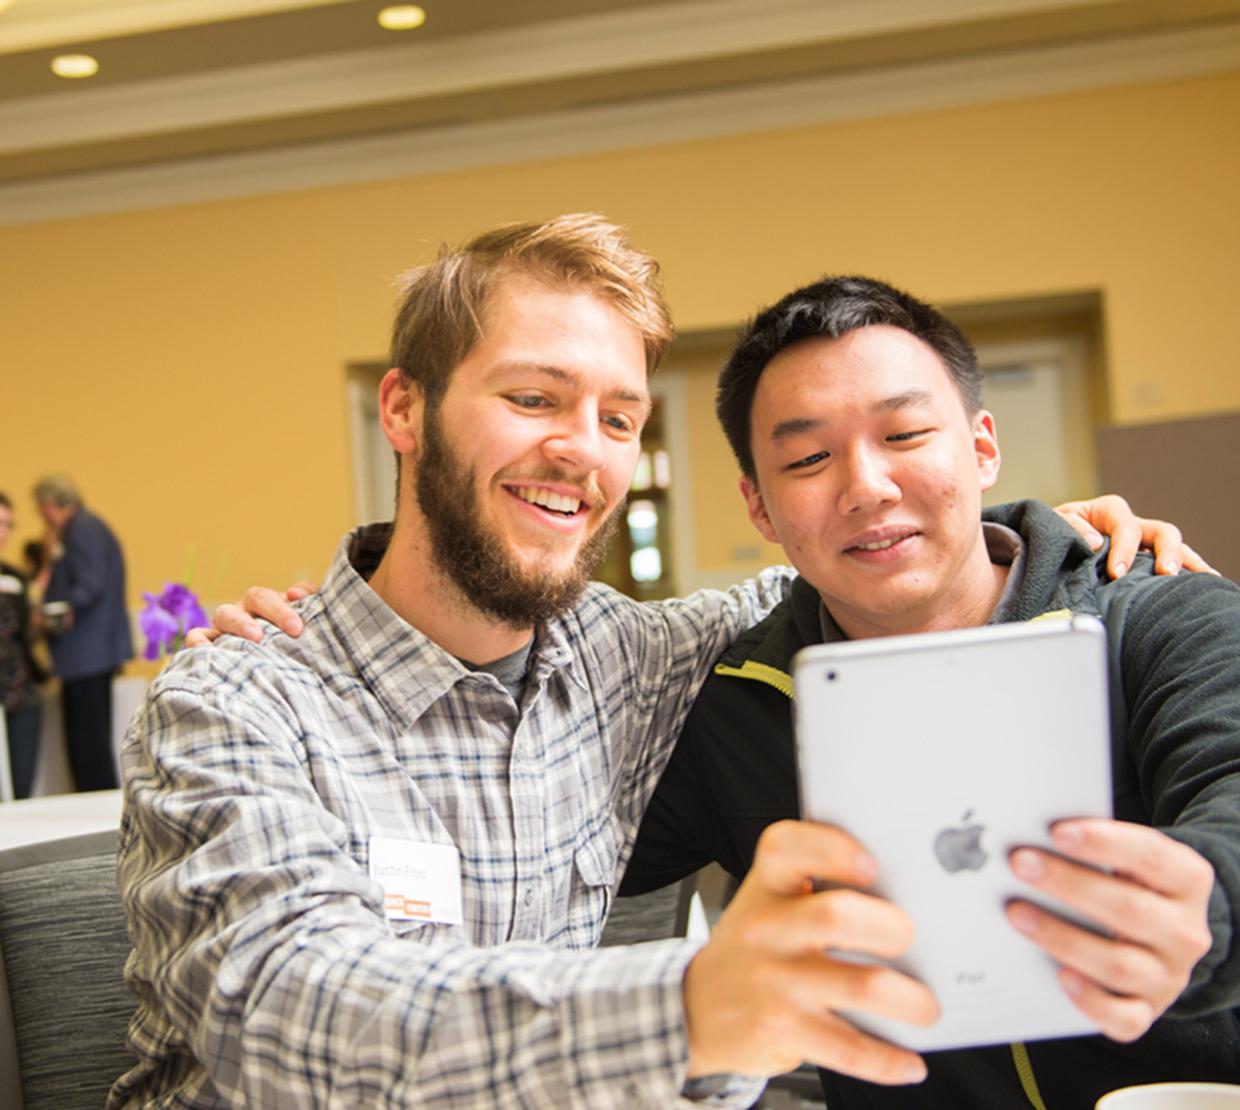 Justin Frost and colleague taking selfie on iPad